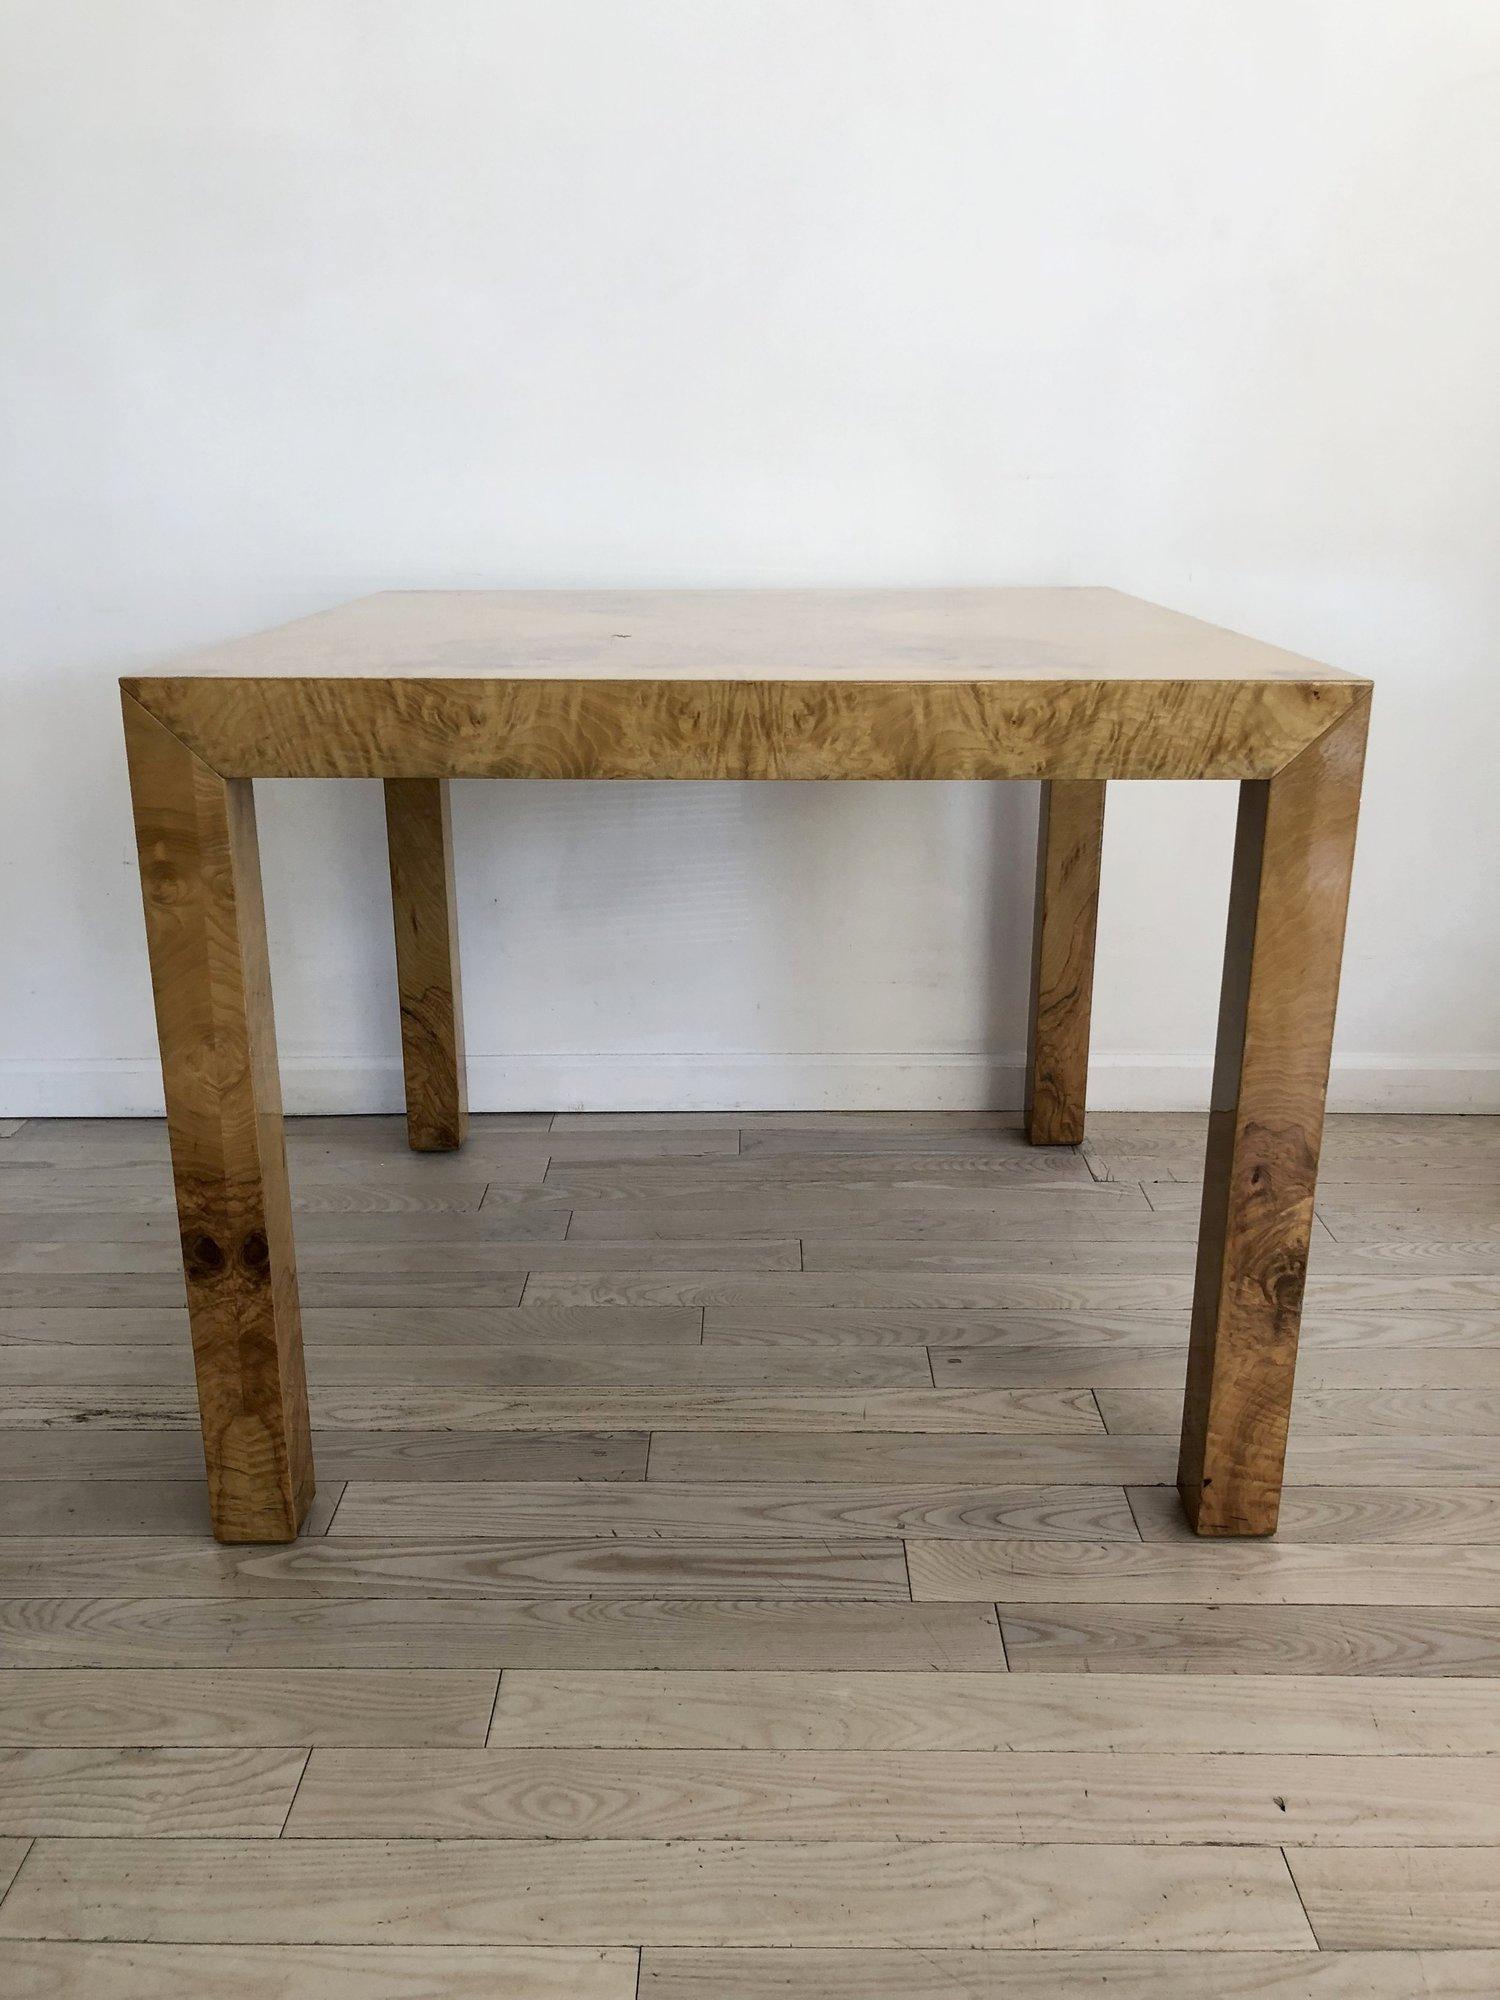 Stunning olive burl wood square dining table by Milo Baughman. Burl wood with resin finish for high shine and protection. Table is from the 1970s. Solid top, does not extend. 
Excellent condition. Minor scuffs from age and use. 
Measures: 36” x